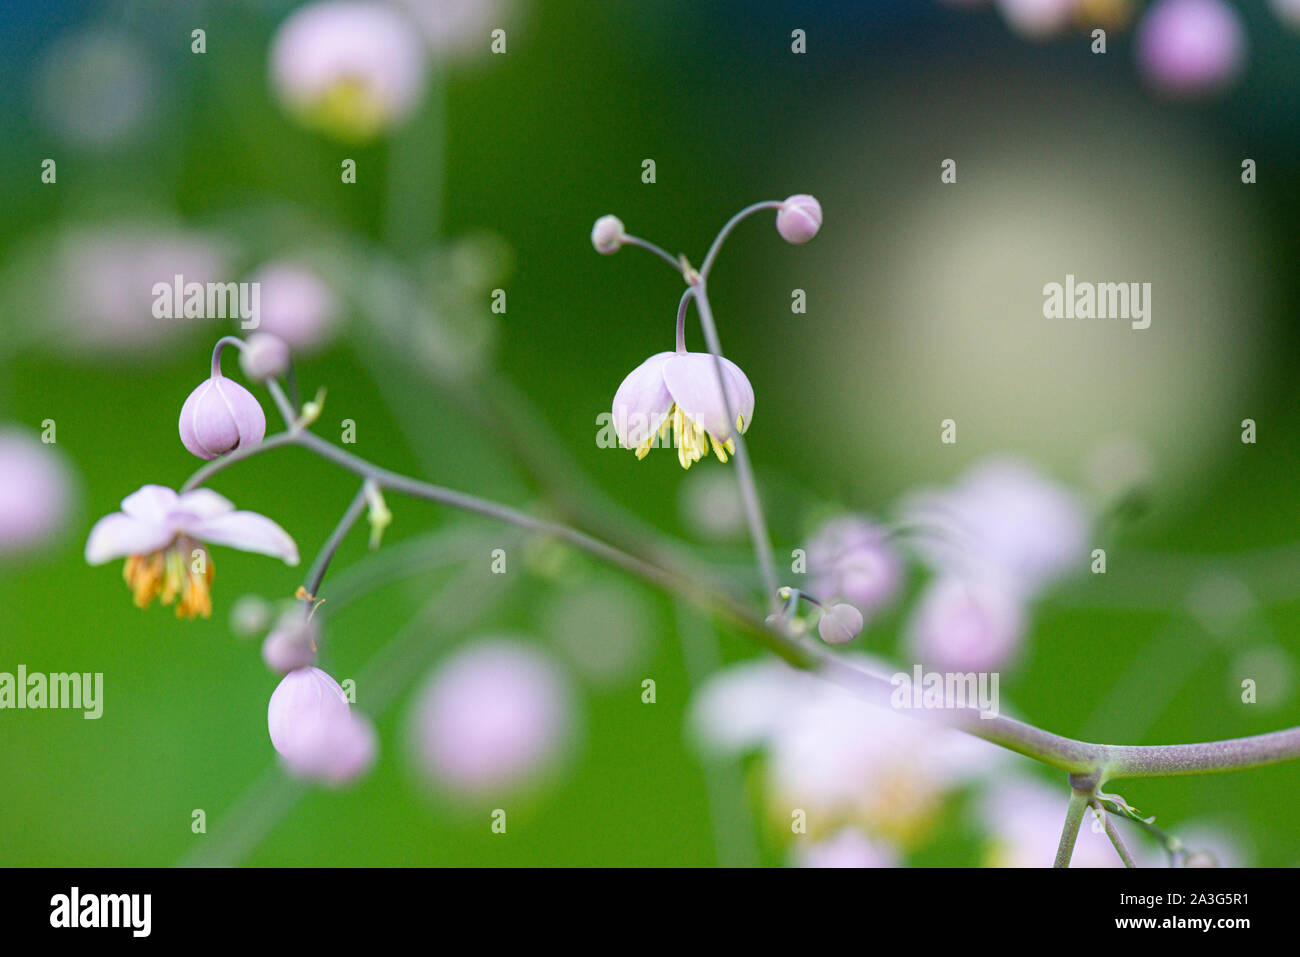 The flowers of a Thalictrum Stock Photo